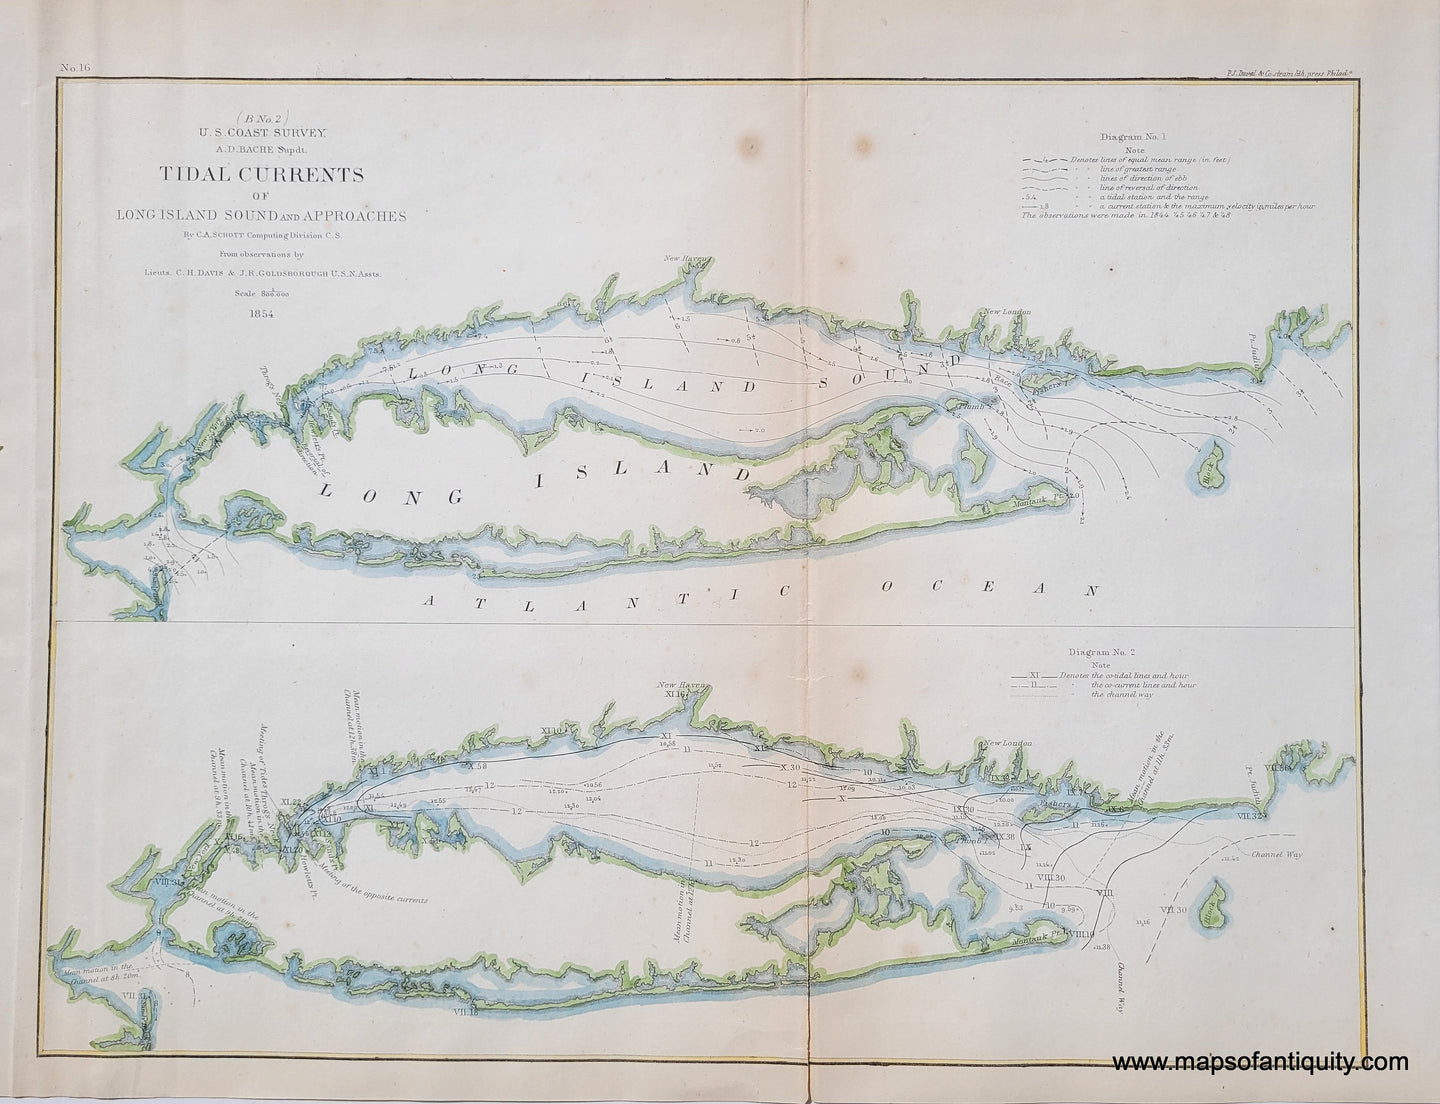 Hand-Colored-Antique-Coast-Chart-Tidal-Currents-of-Long-Island-Sound-and-Approaches-**********-United-States-New-York-1854-USCS-Maps-Of-Antiquity